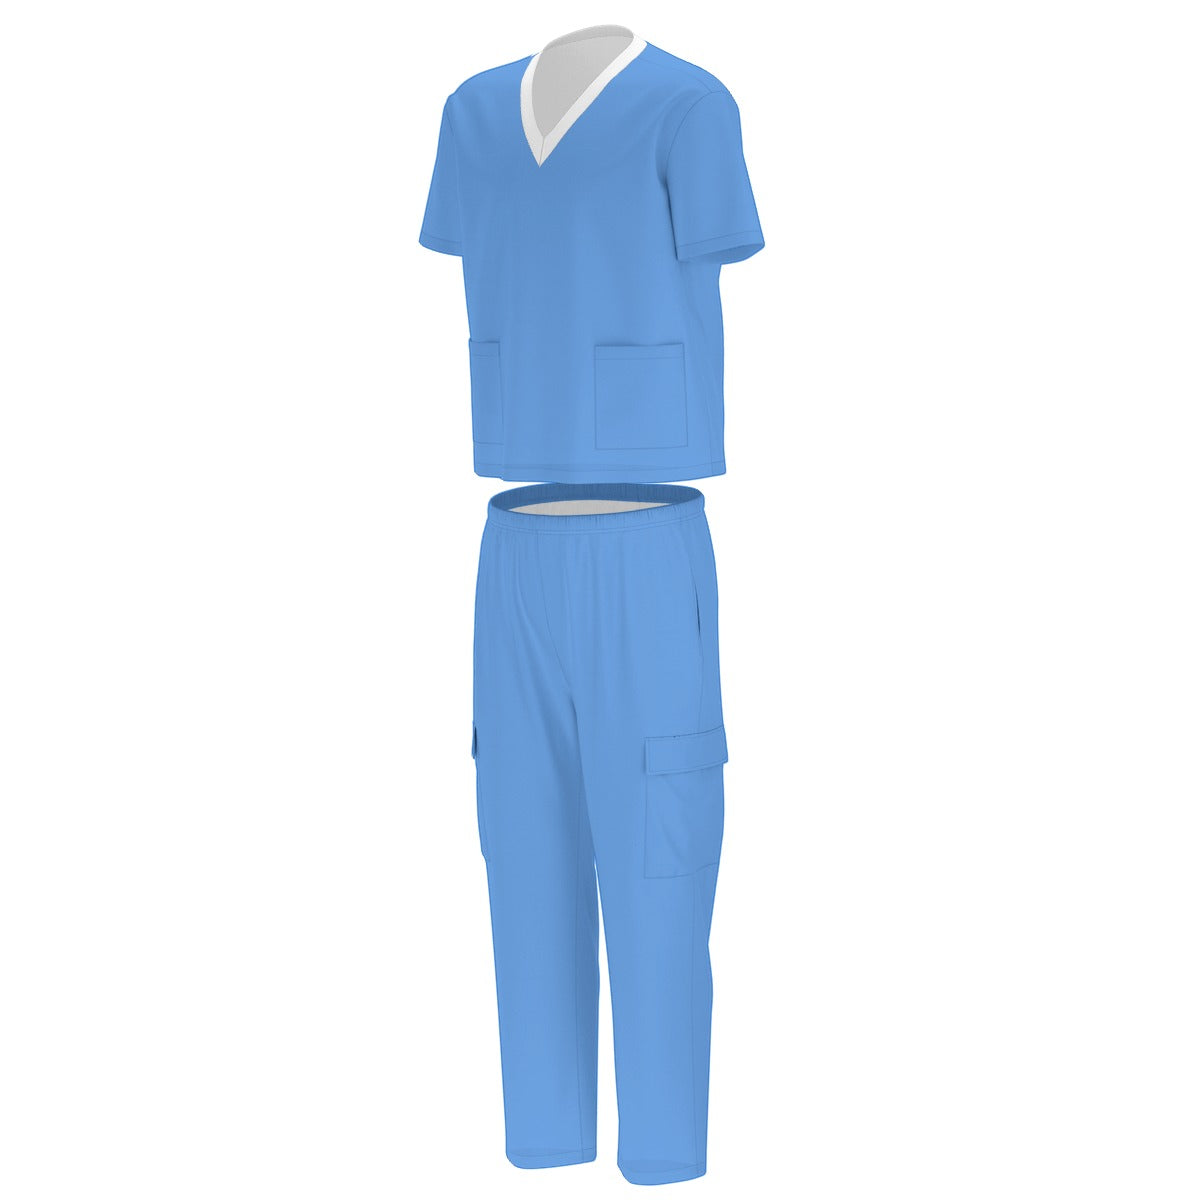 All-Over Print Unisex Scrub Set With Six Pockets